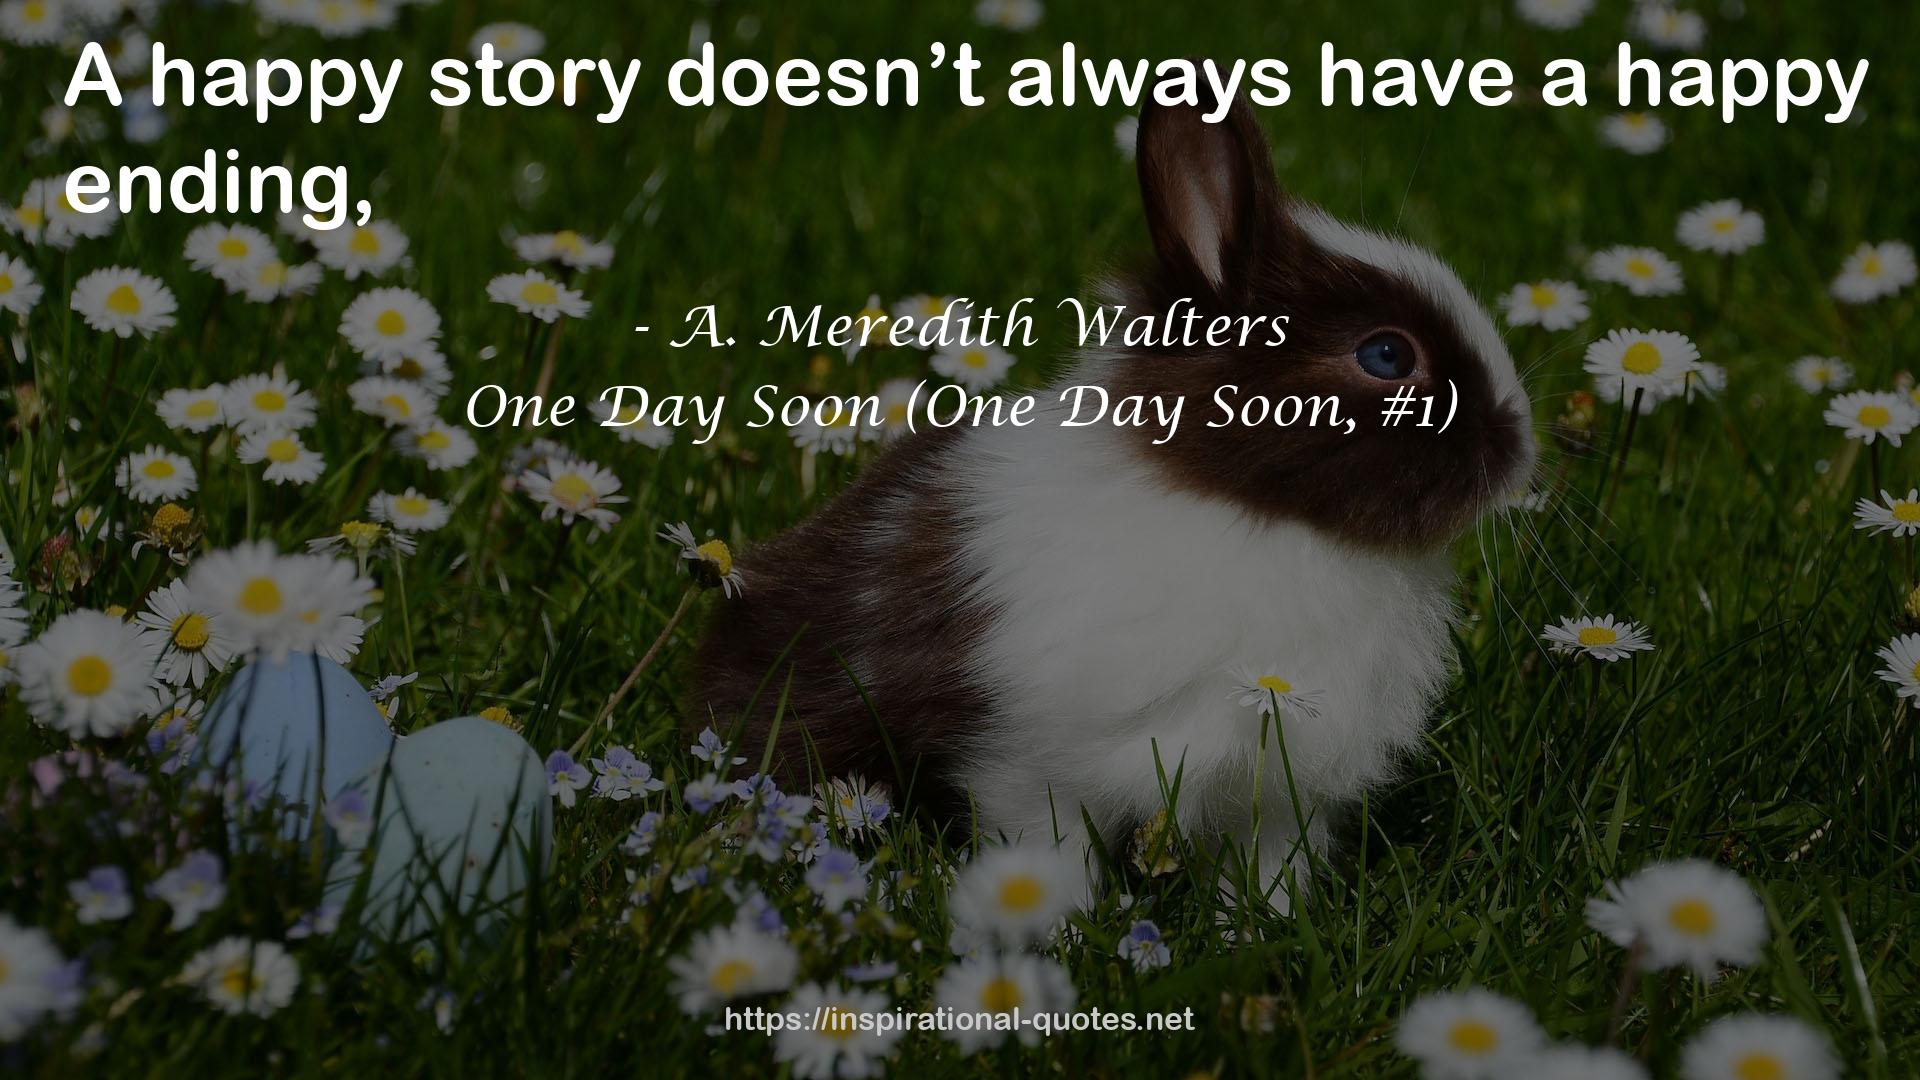 One Day Soon (One Day Soon, #1) QUOTES